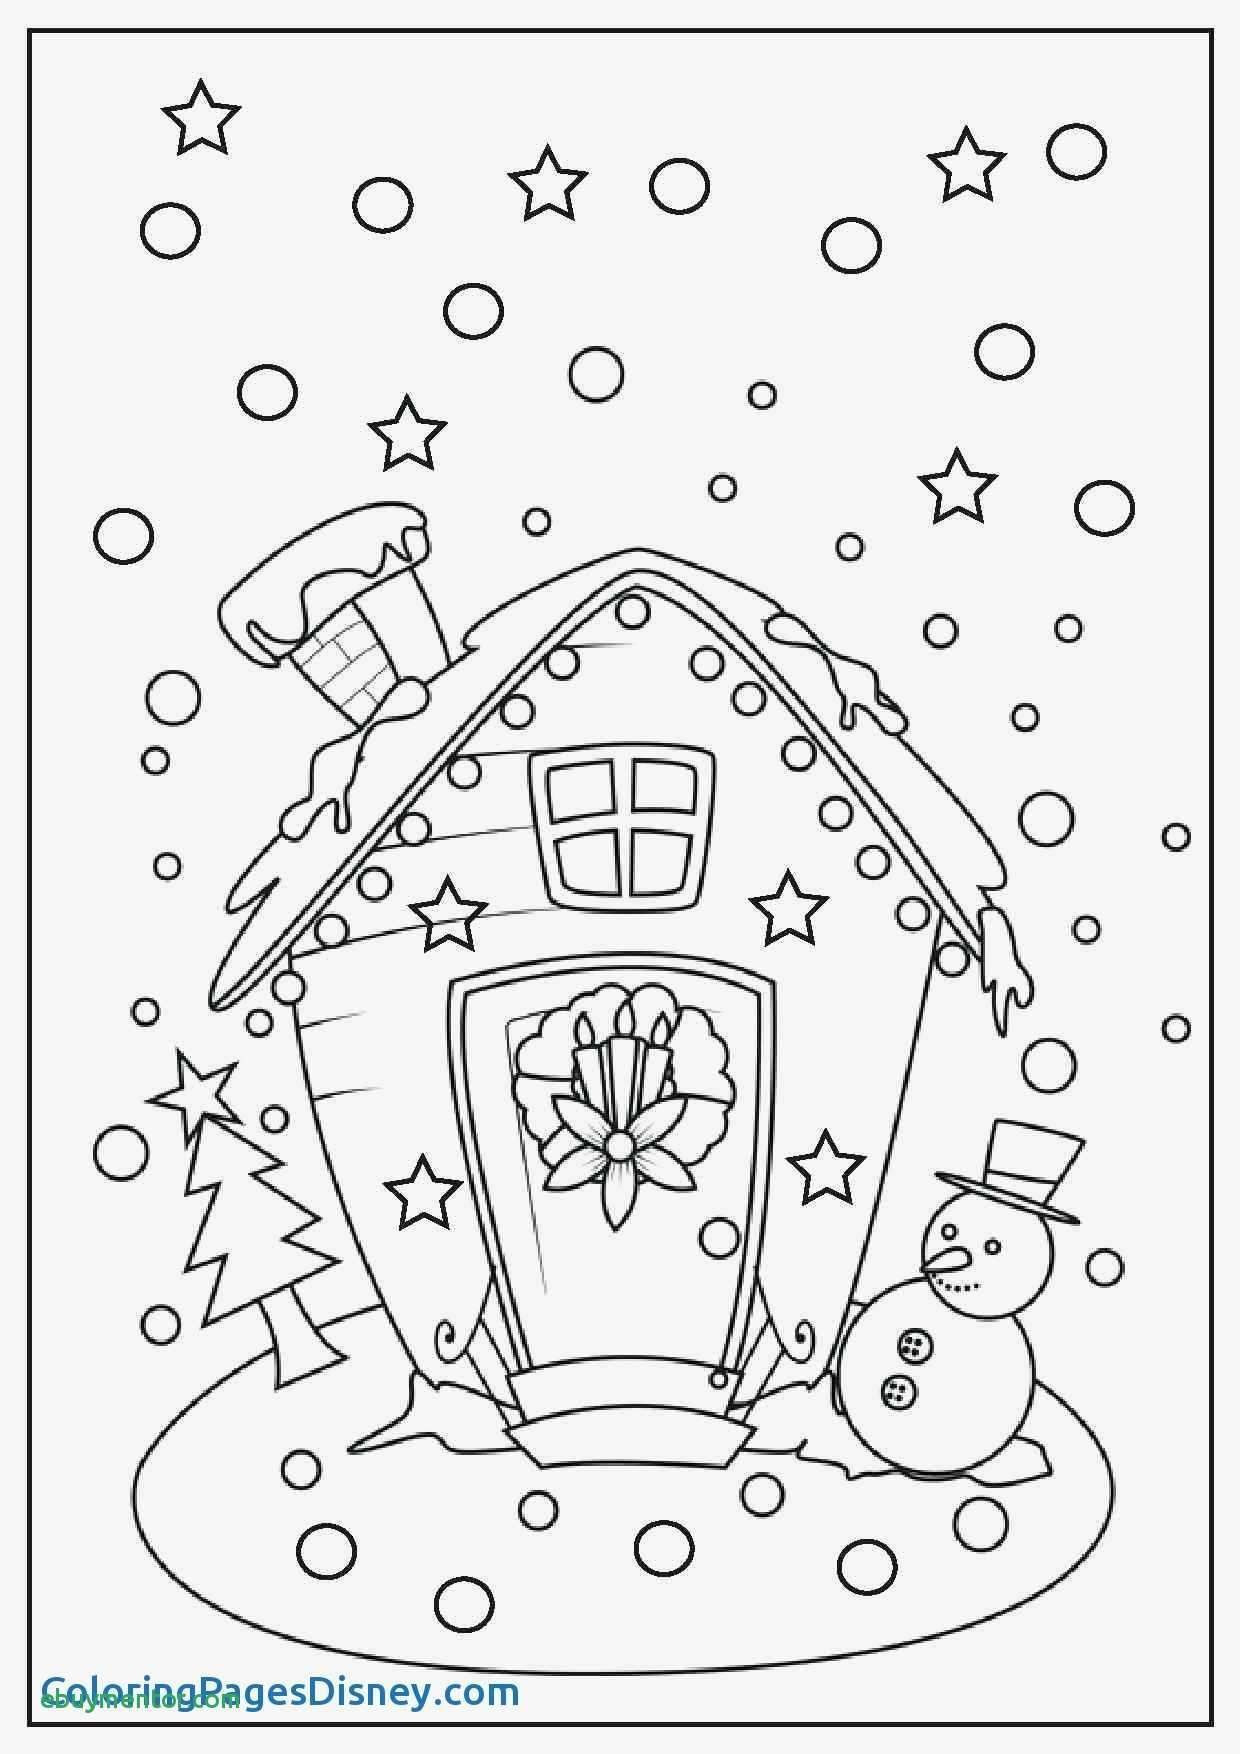 30 Lovable Teddy Bear Vase 2024 free download teddy bear vase of elegant free coloring of teddy bear doyanqq me within christmas coloring sheets nativity christmas coloring sheets nativity cool coloring printables 0d fun